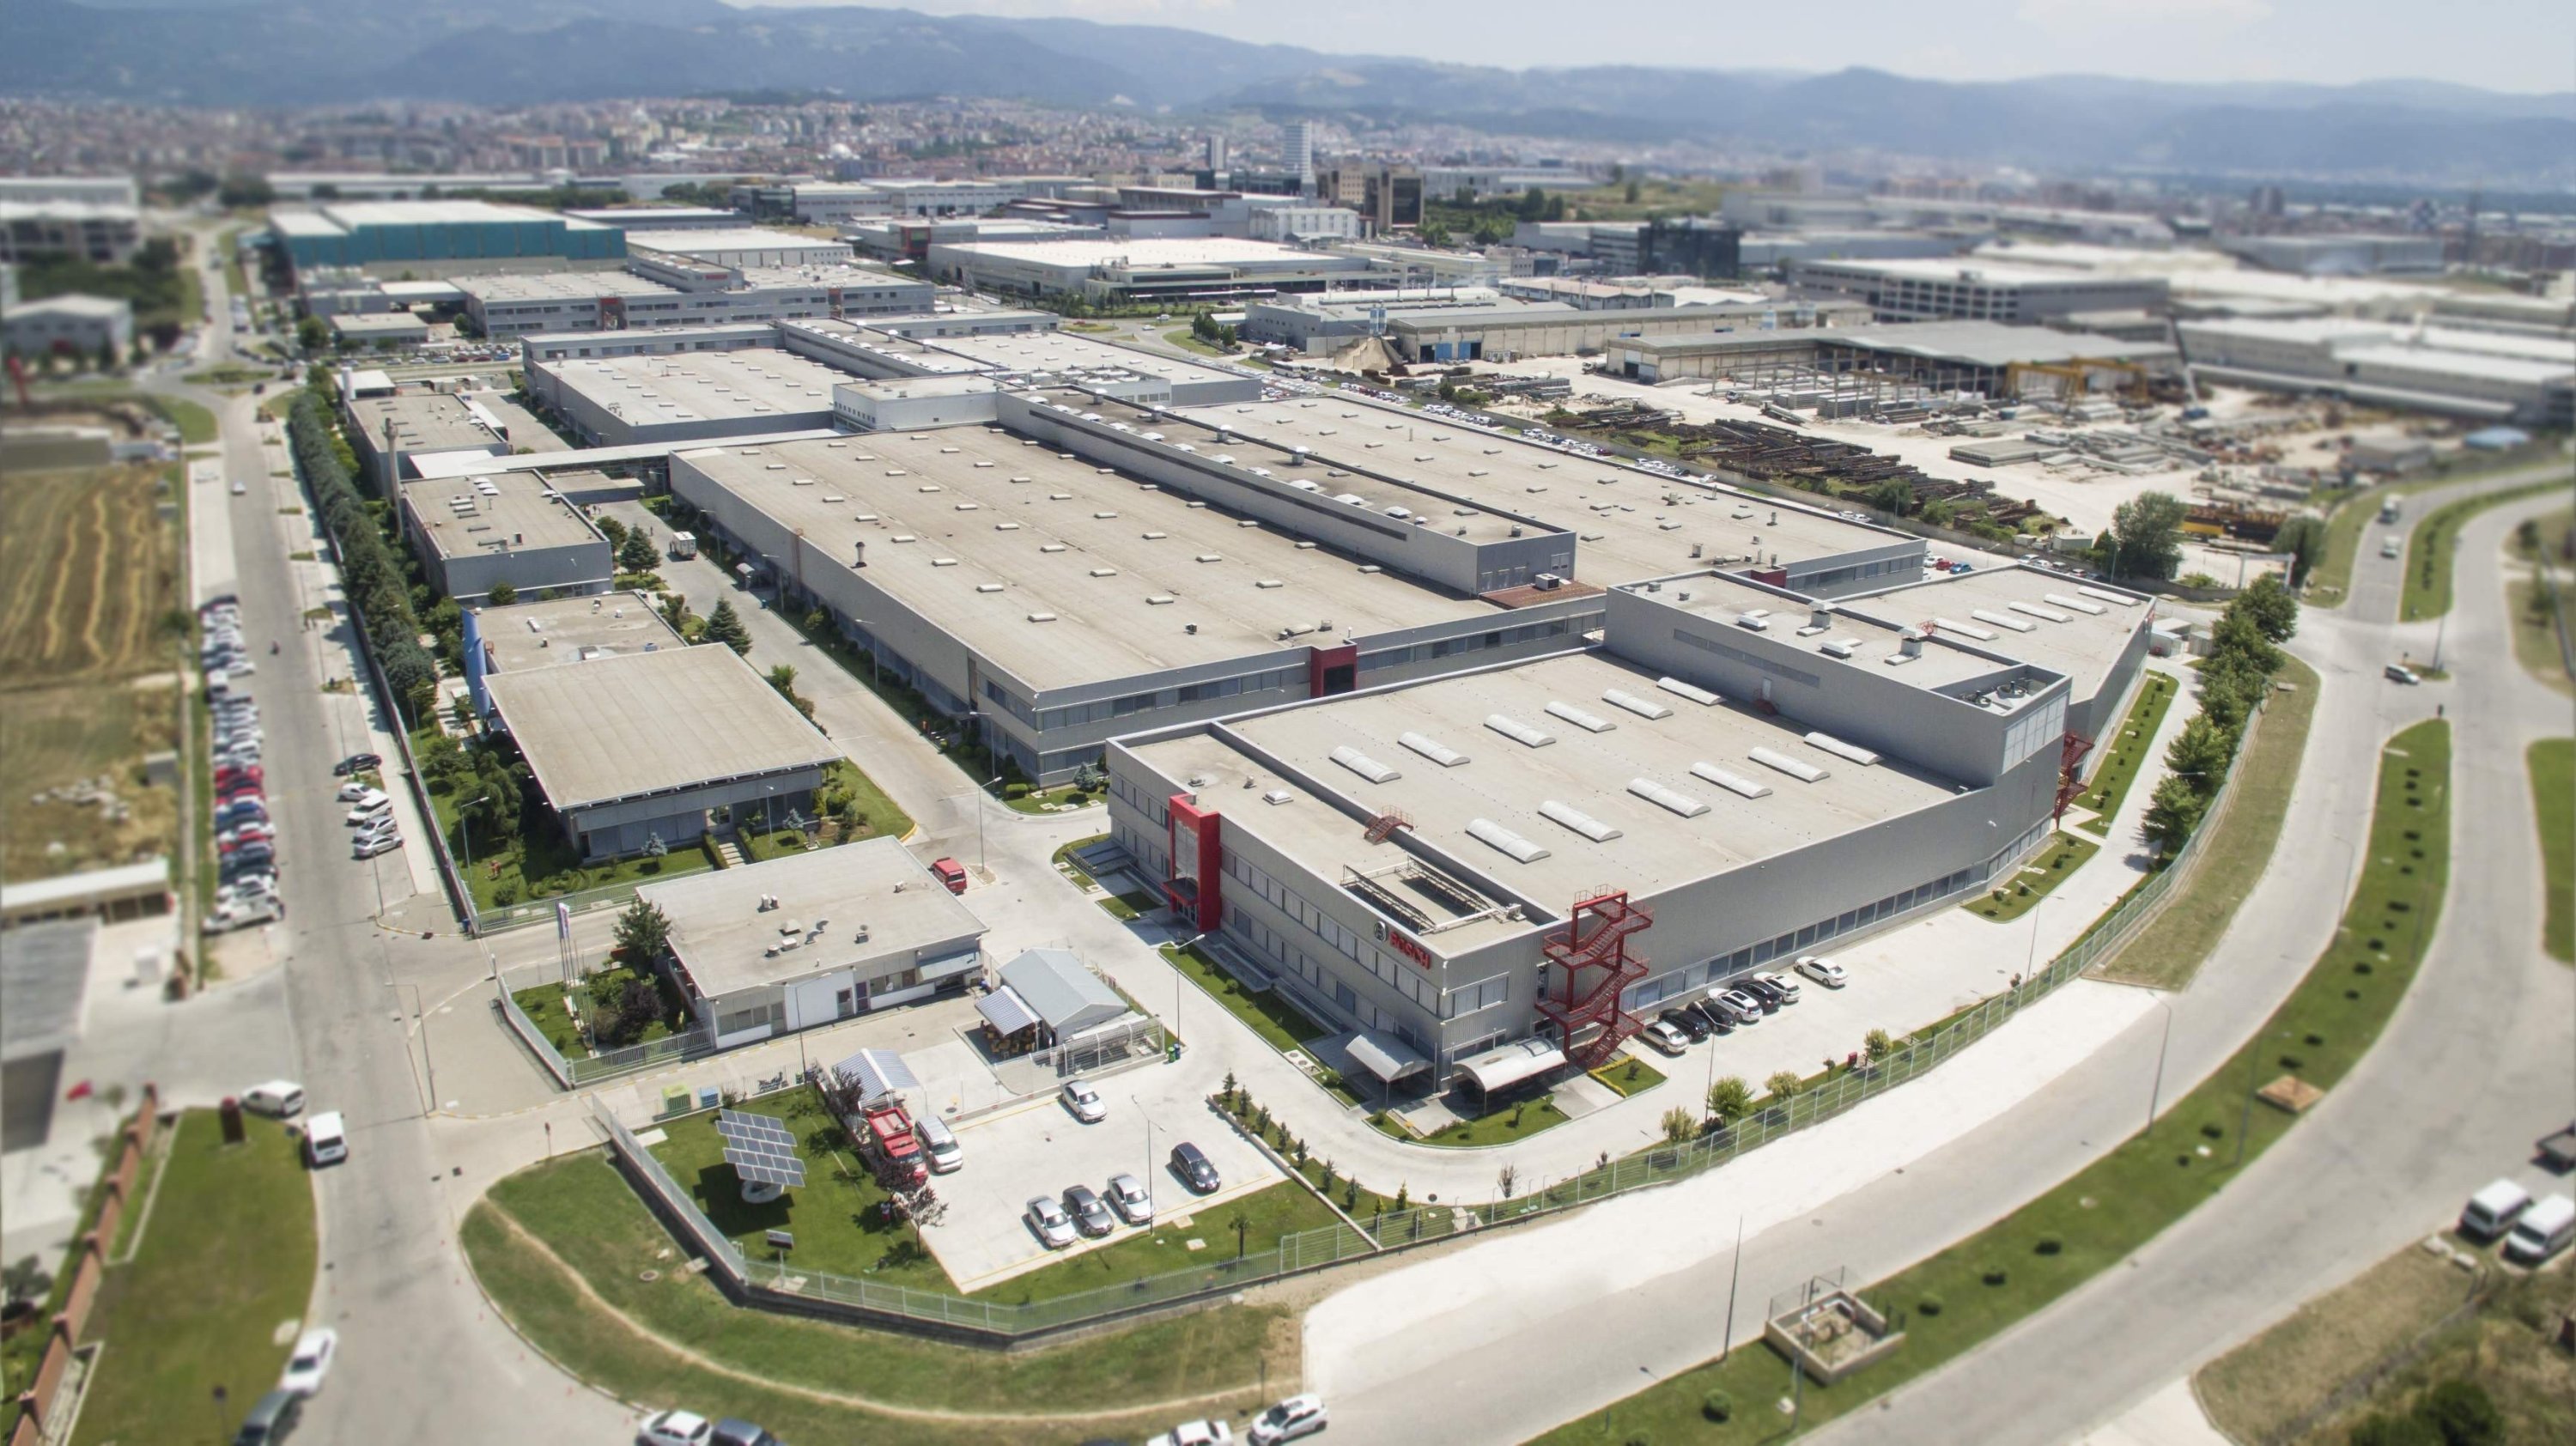 Loosen replace Demon Play German giant Bosch to invest additional TL 500M in Bursa plant | Daily Sabah